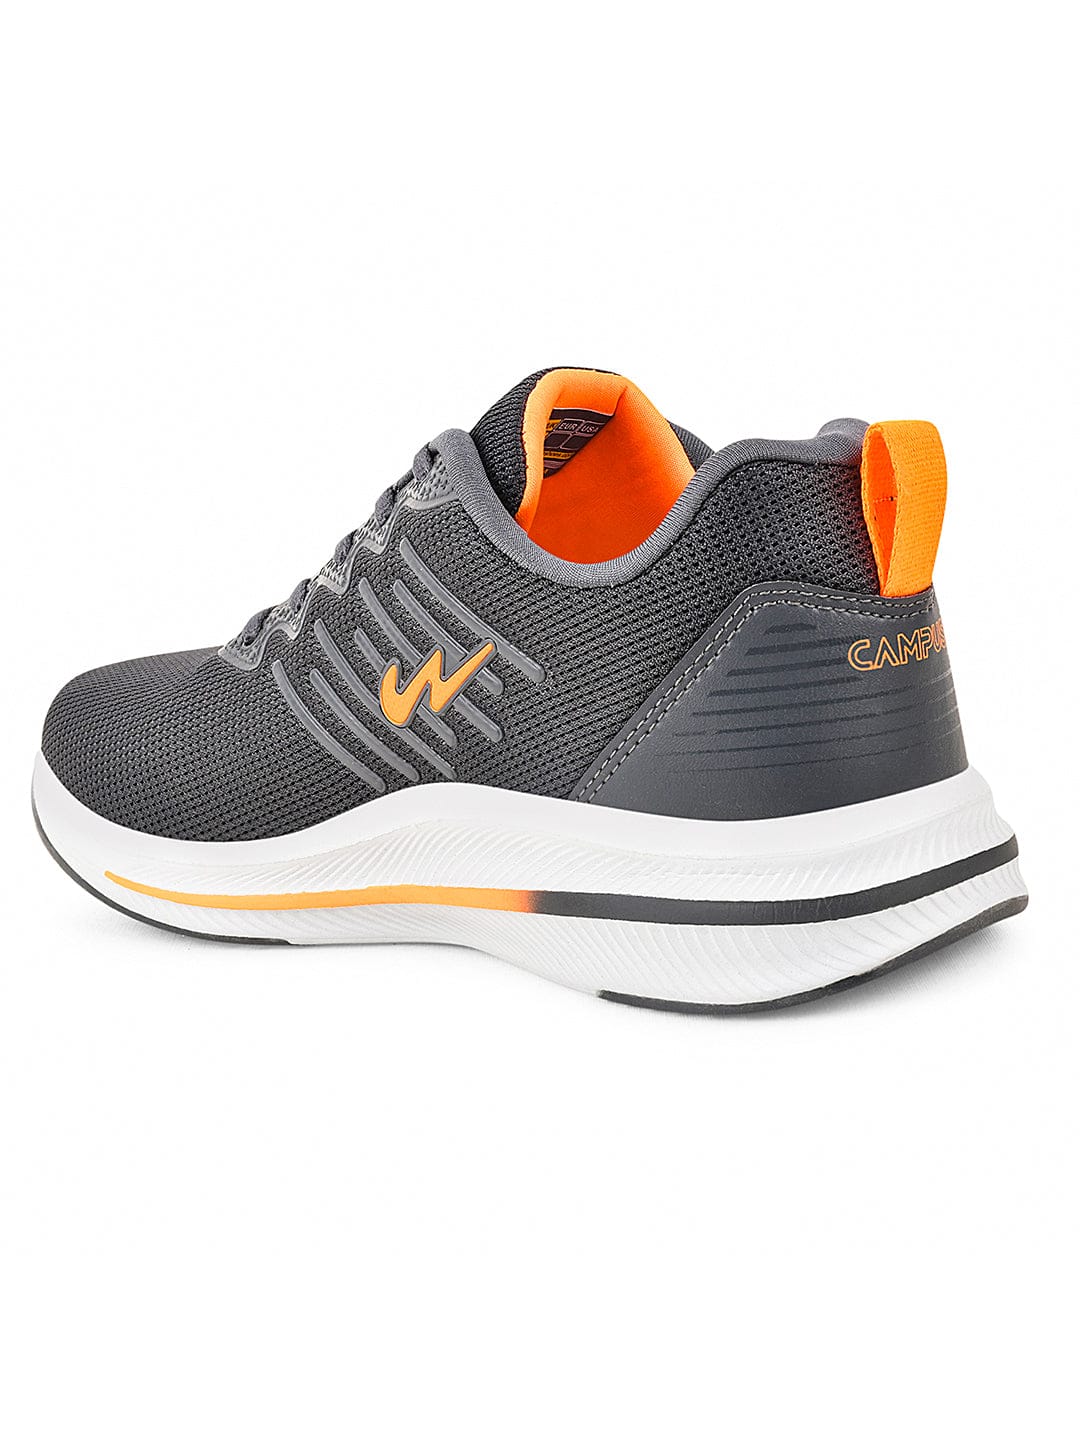 Buy Running Shoes For Men: Camp-Miracle-D-Gry-Org | Campus Shoes